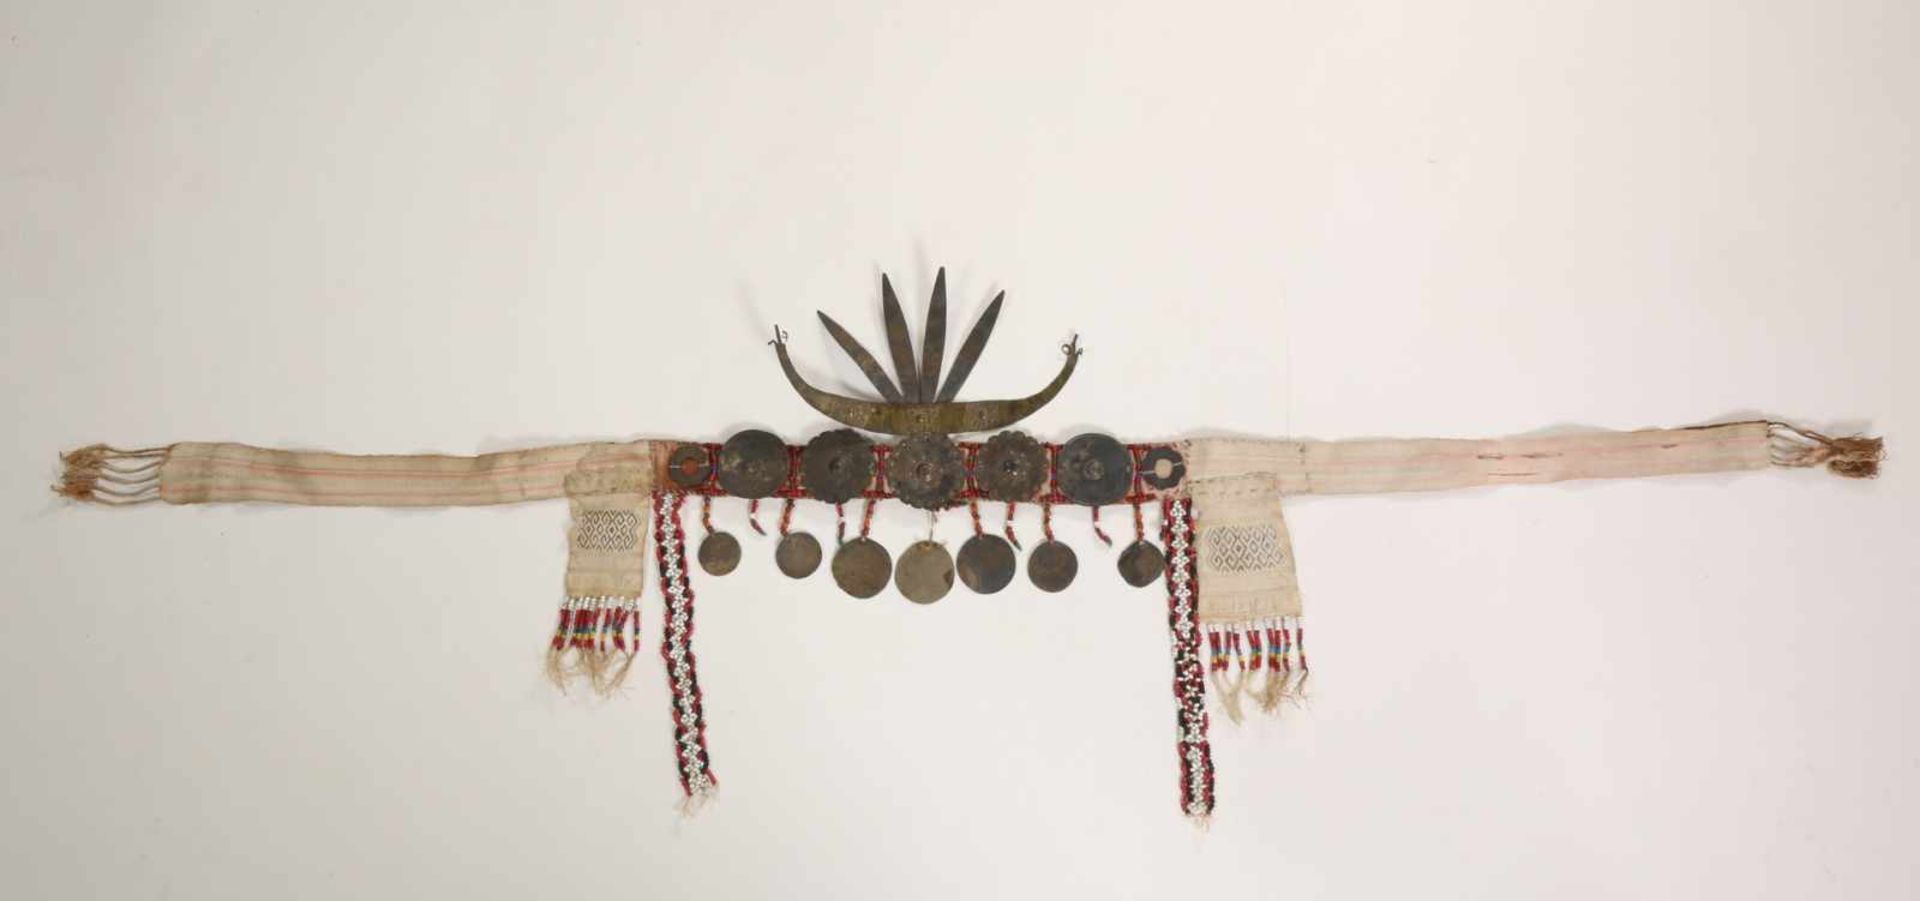 Timor, headhunters jewellery;woven textile with beads and metal ornaments and crown, h. 17 cm. [1]